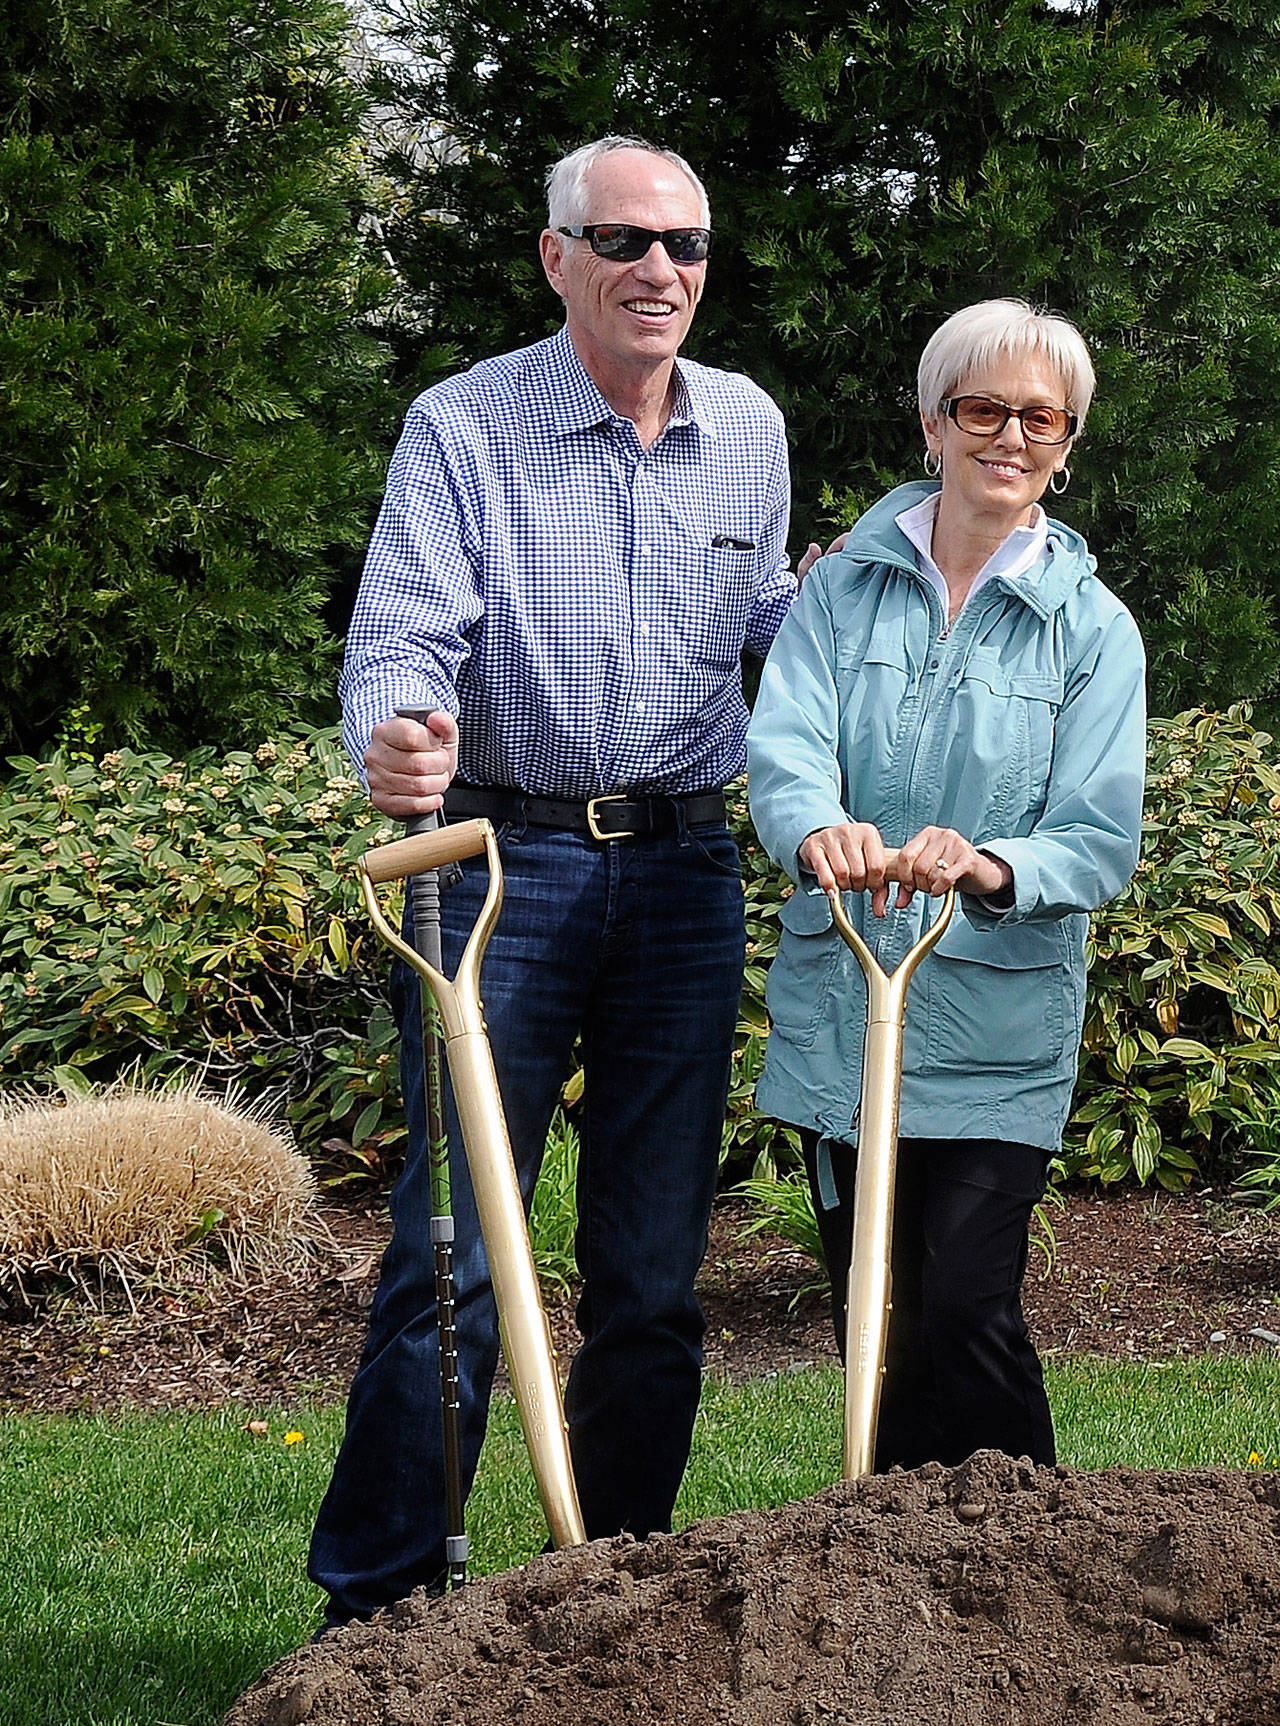 Bill and Esther Littlejohn are pictured at a groundbreaking ceremony at the Olympic Medical Cancer Center in April. The event honored major donors to a campaign that raised $1.2 million of the $4.4 million OMCC expansion. Bill Littlejohn, a longtime businessman and philanthropist, died Dec. 12. Sequim Gazette file photo by Michael Dashiell